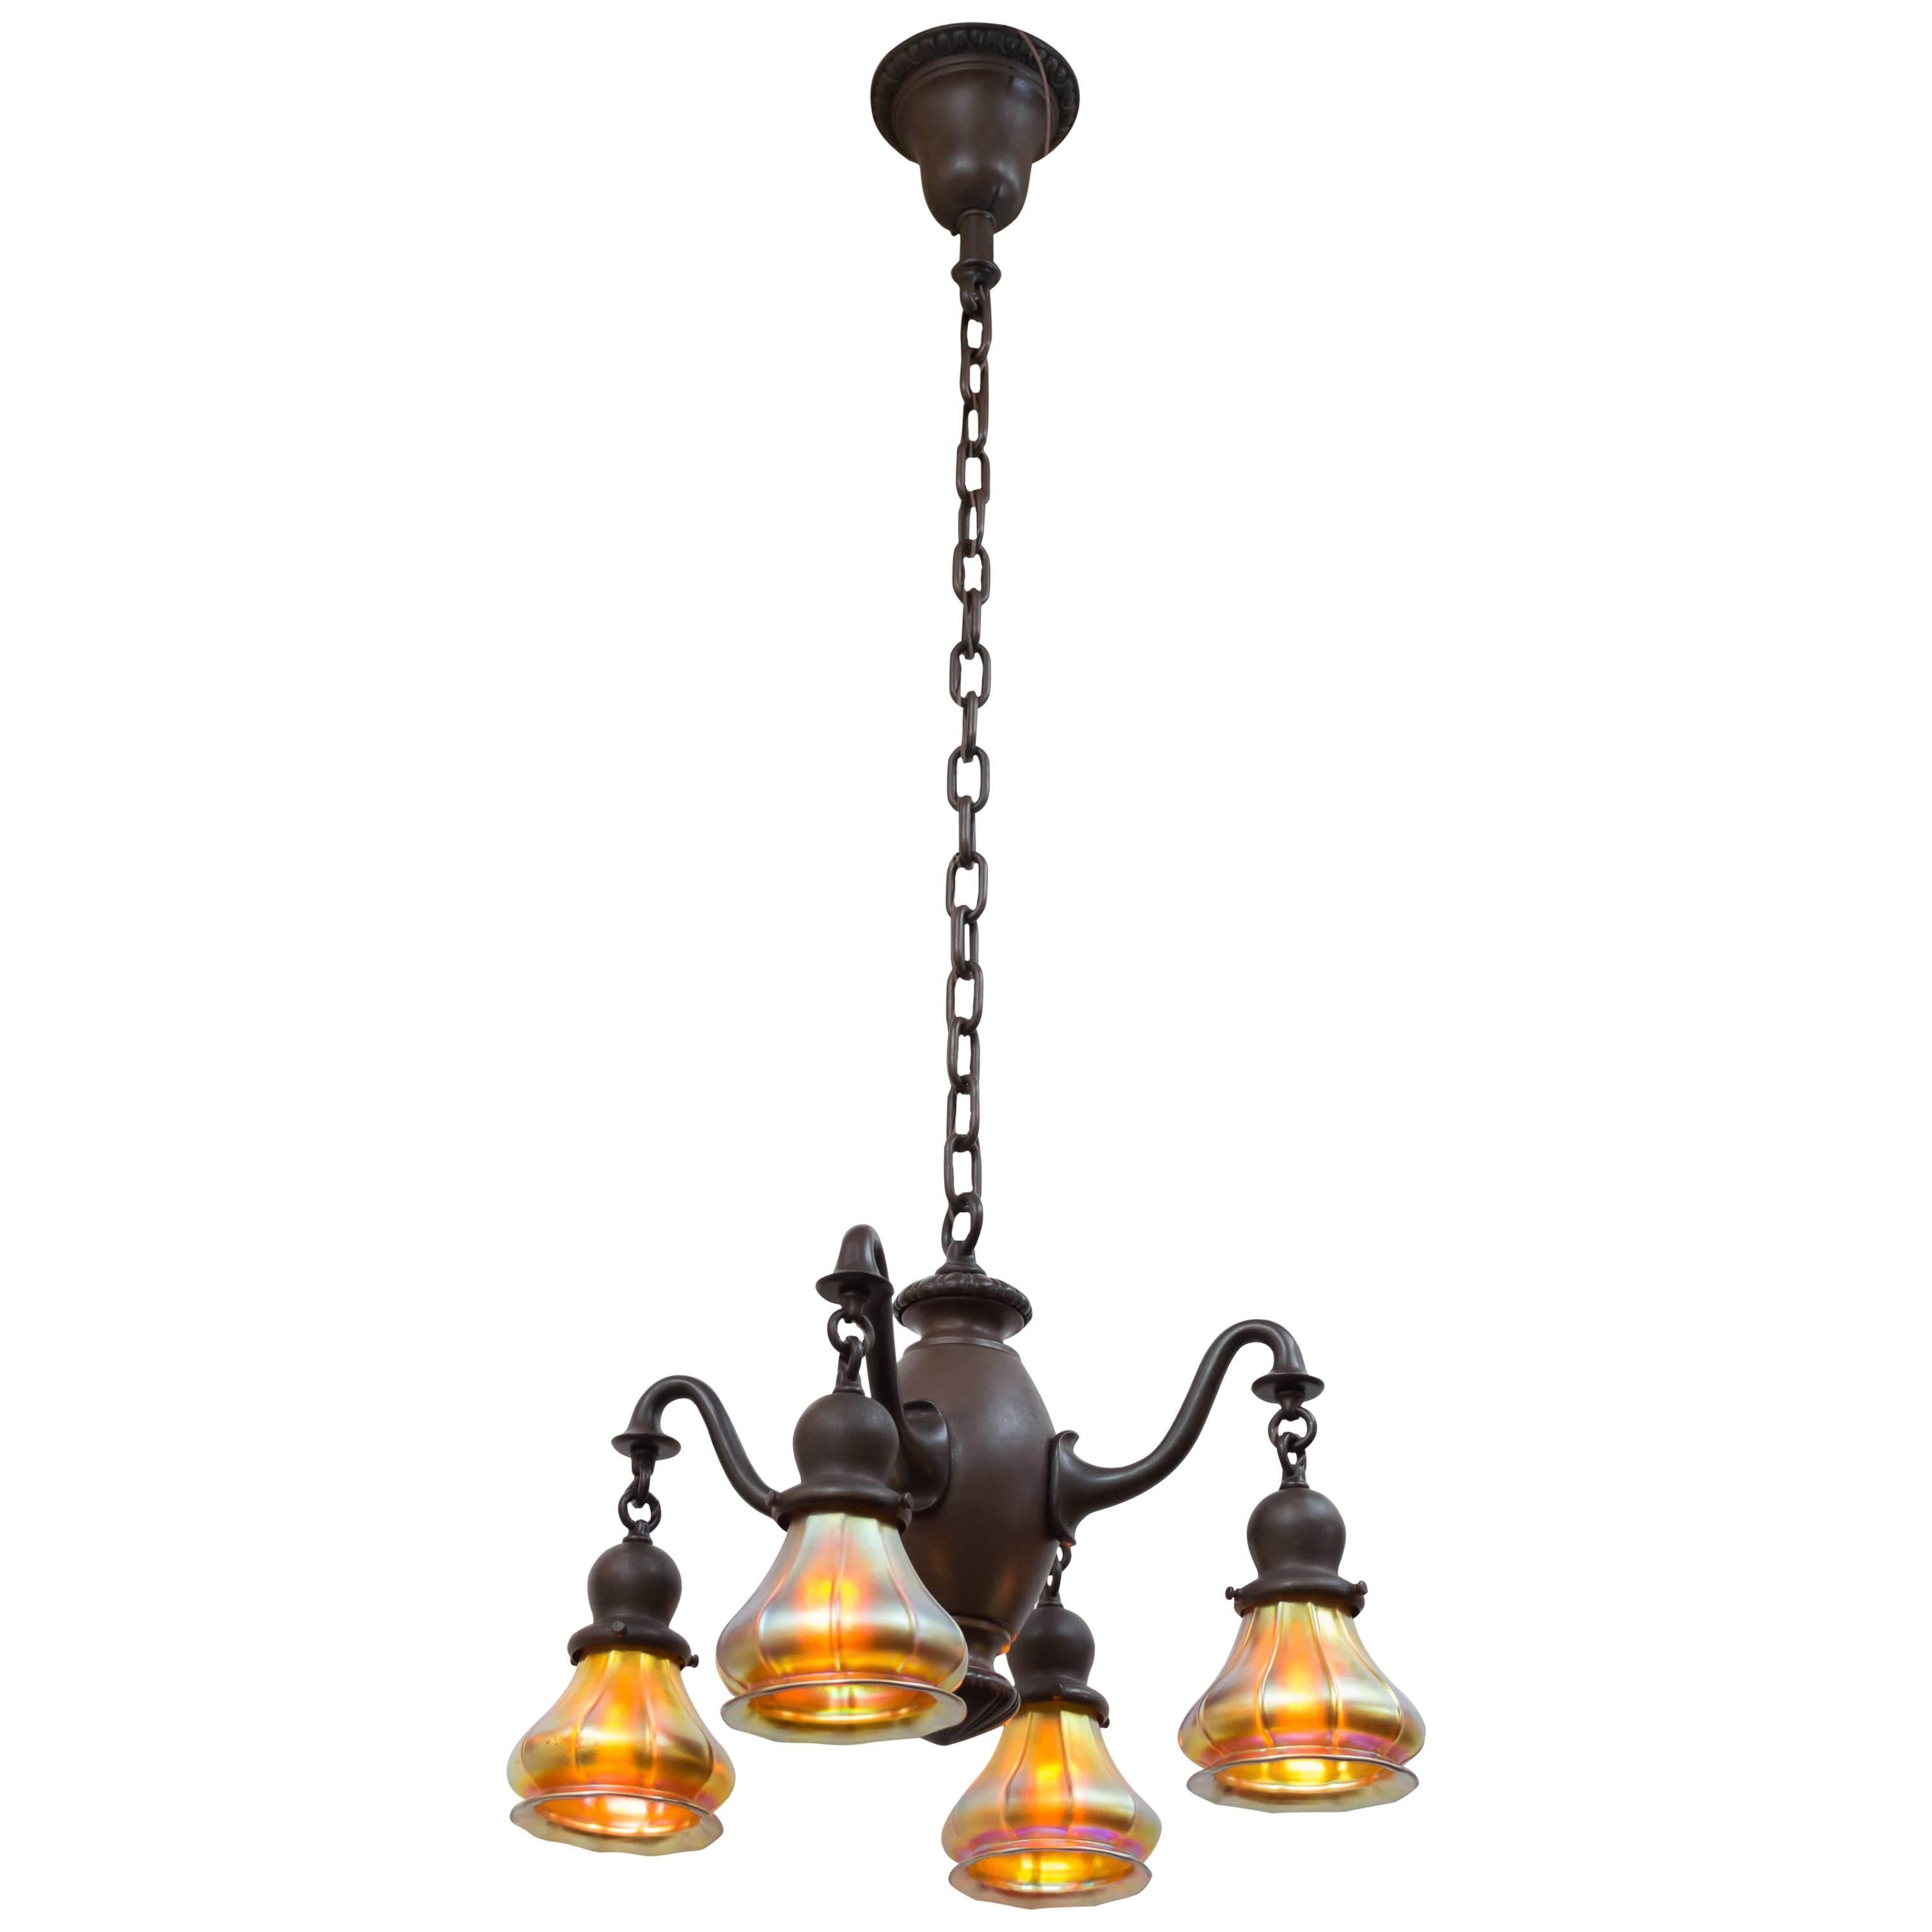 Four-Arm Chandelier with Art Glass Shades